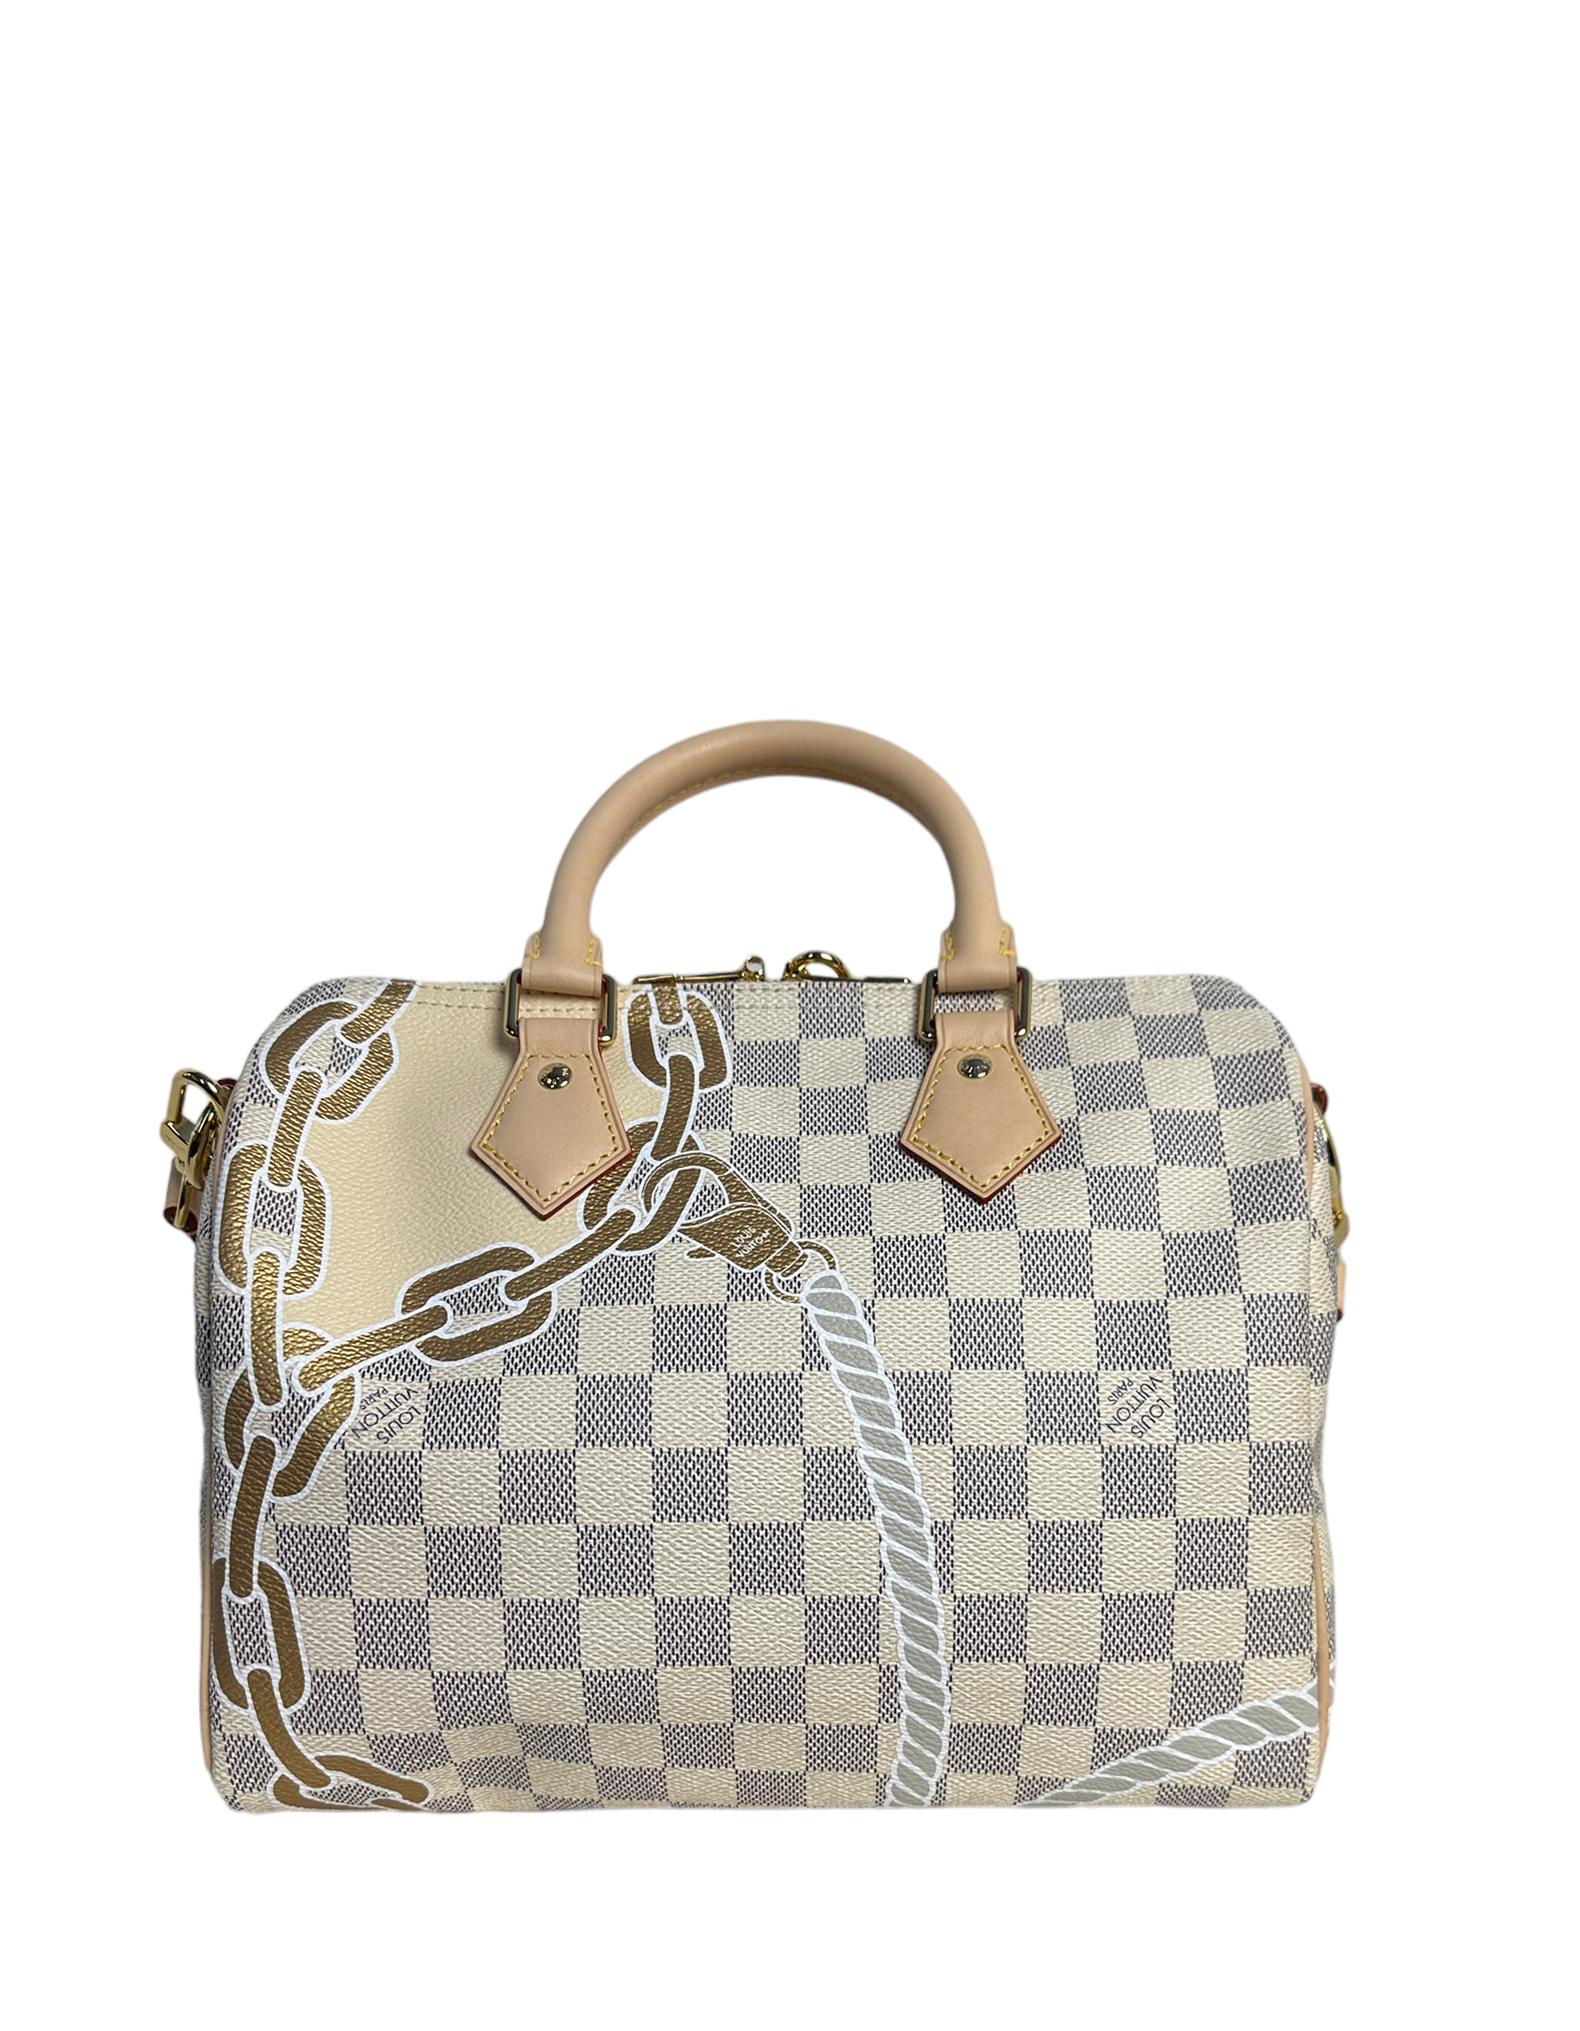 Louis Vuitton Limited Edition Nautical Damier Azur Speedy Bandouliere 25 Bag In Excellent Condition For Sale In New York, NY